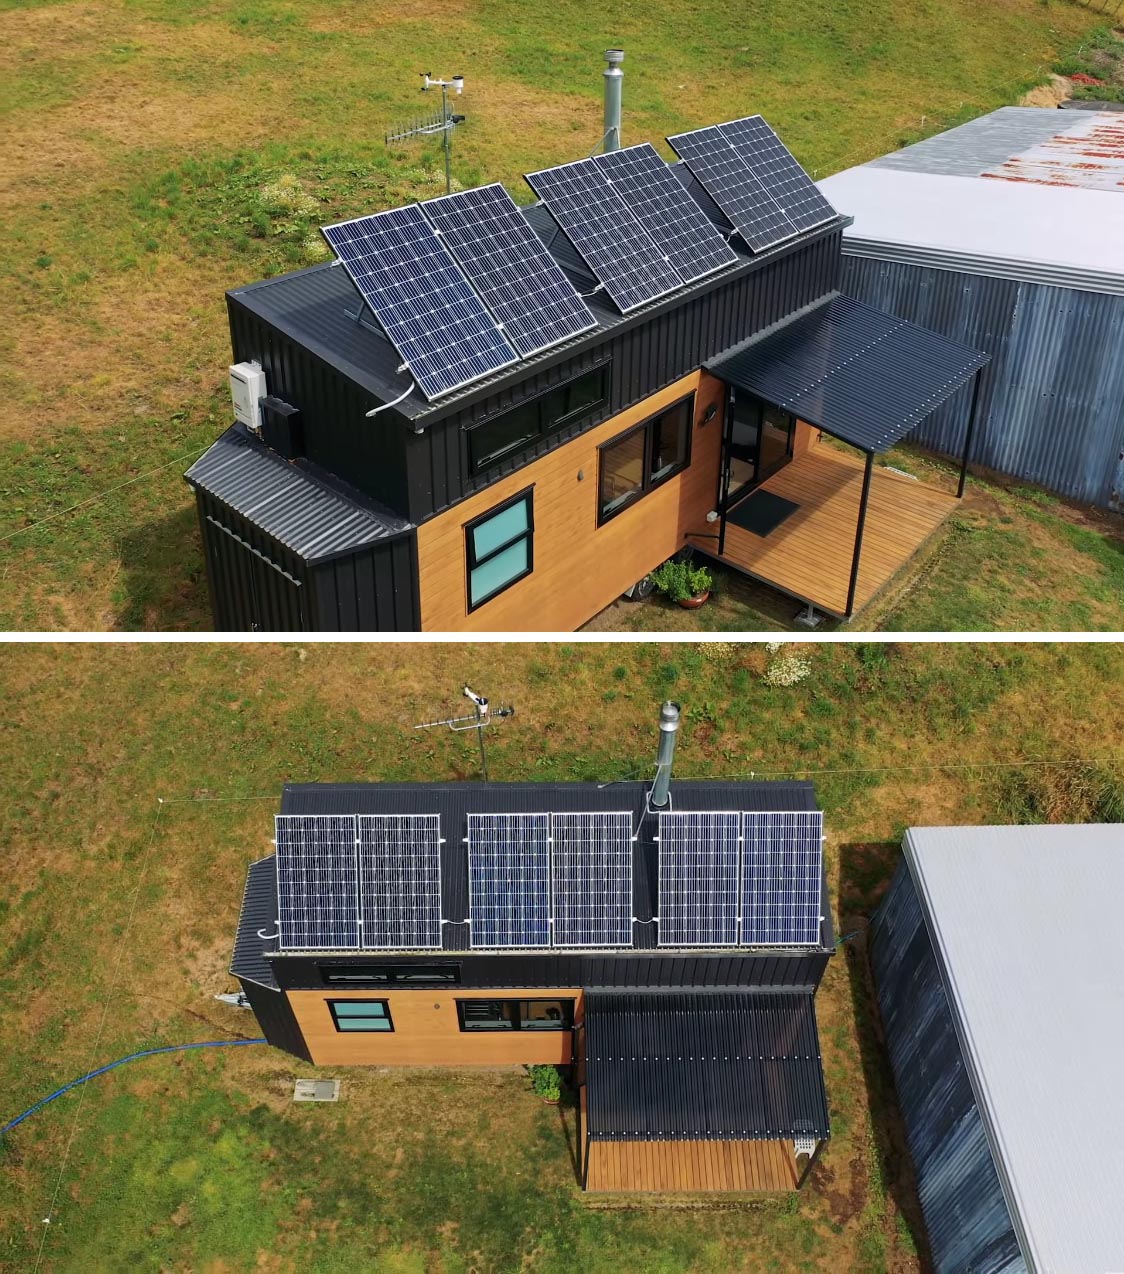 A modern off-the-grid tiny home with solar panels and rainwater collection.